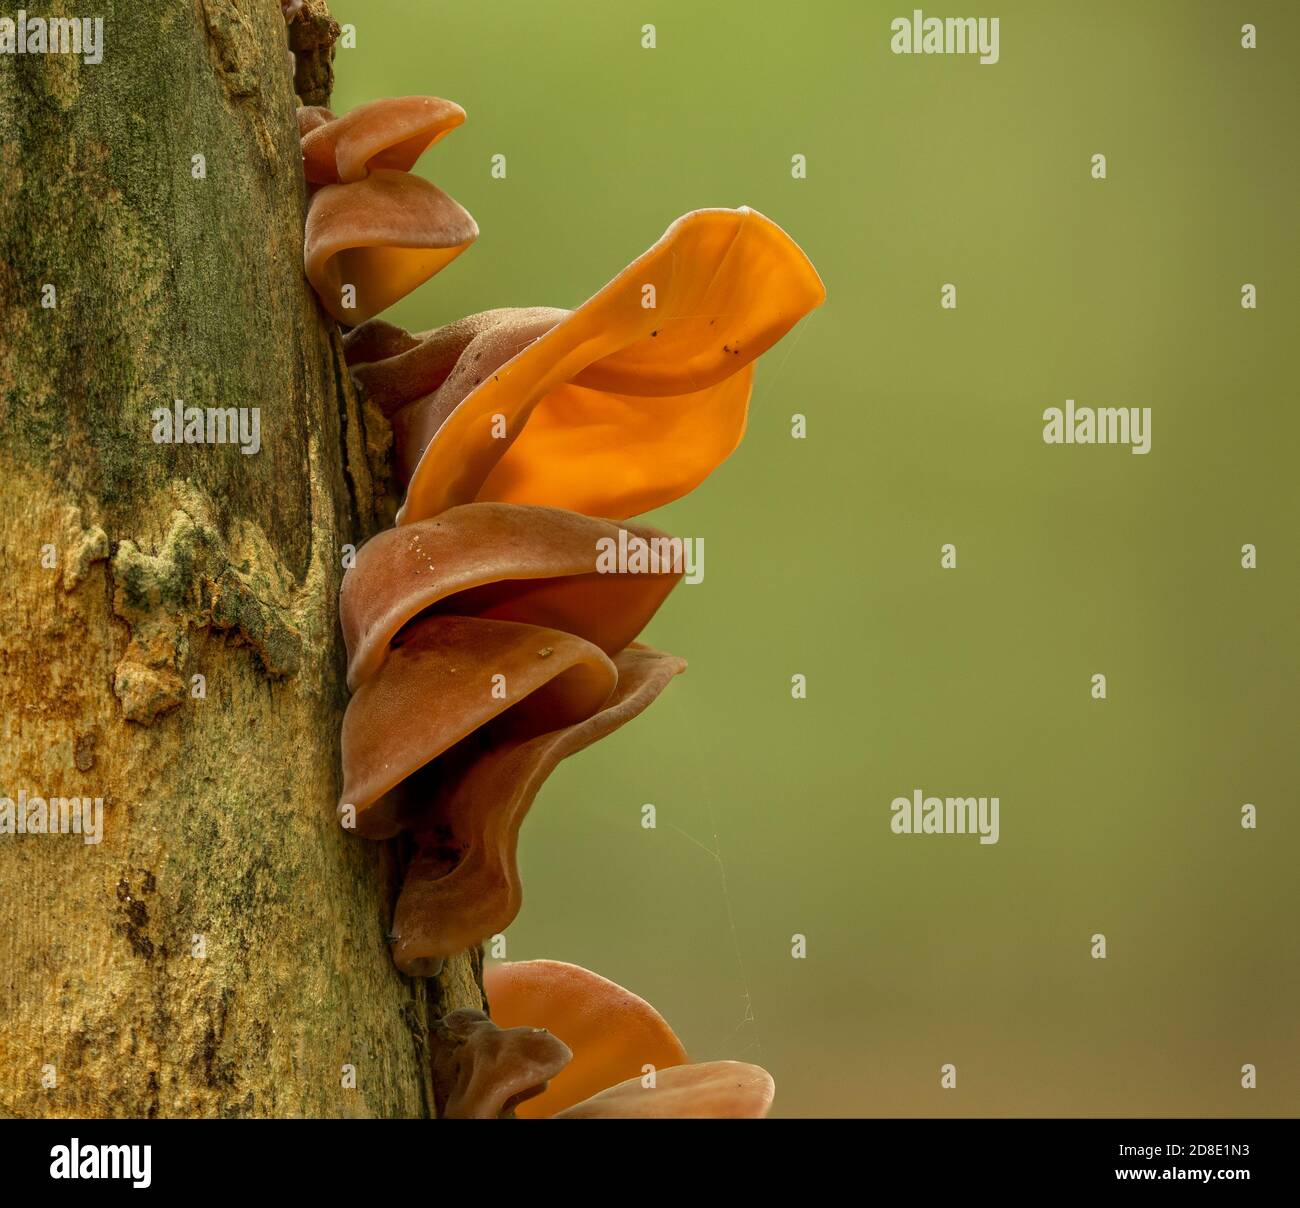 Fungi names real Judas ear, Jew's ear, wood ear, jelly ear, grows upon stems, Heilooer forest, Netherlands Stock Photo